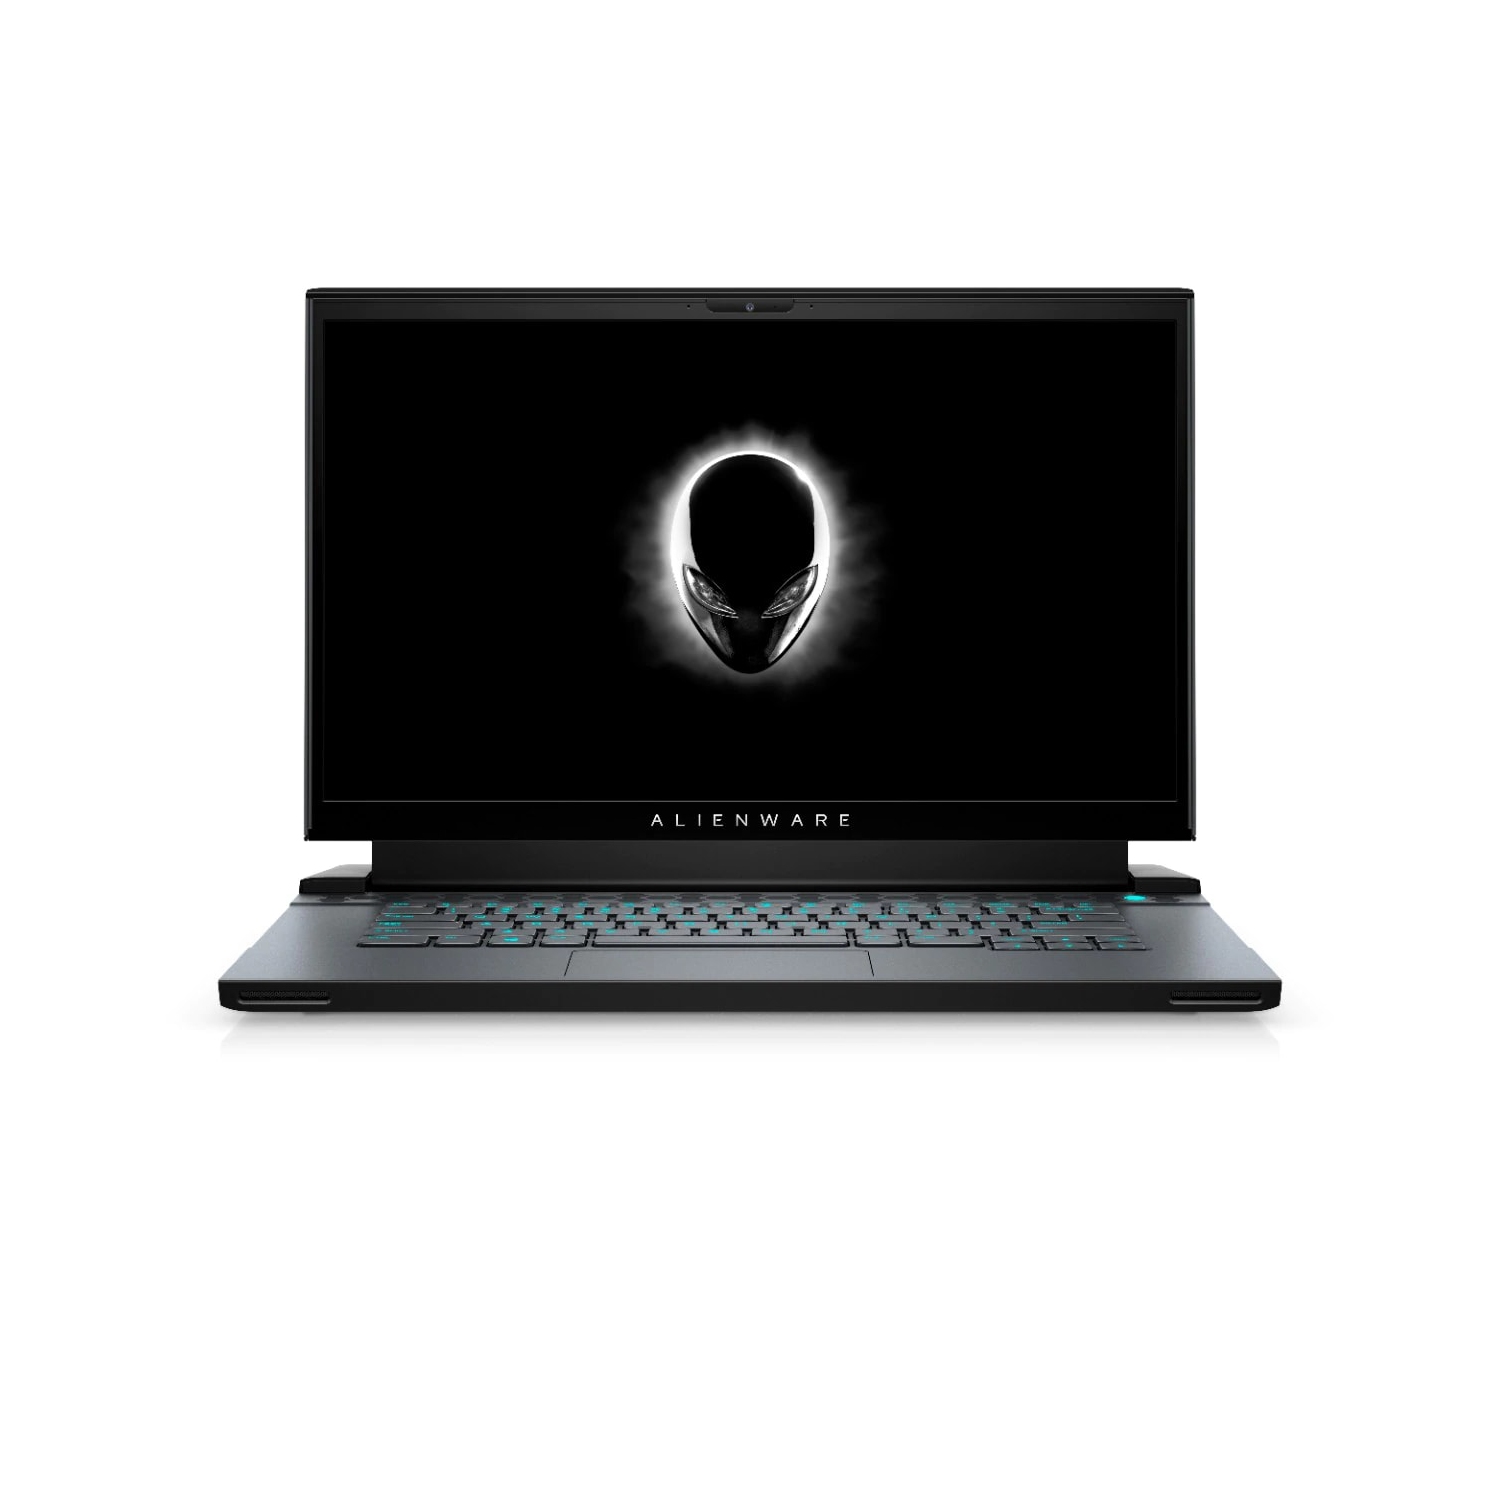 Refurbished (Excellent) - Dell Alienware m15 R4 Gaming Laptop (2021), 15.6" FHD, Core i7, 1TB SSD, 16GB RAM, RTX 3070, 8 Cores @ 5 GHz, 10th Gen CPU Certified Refurbished